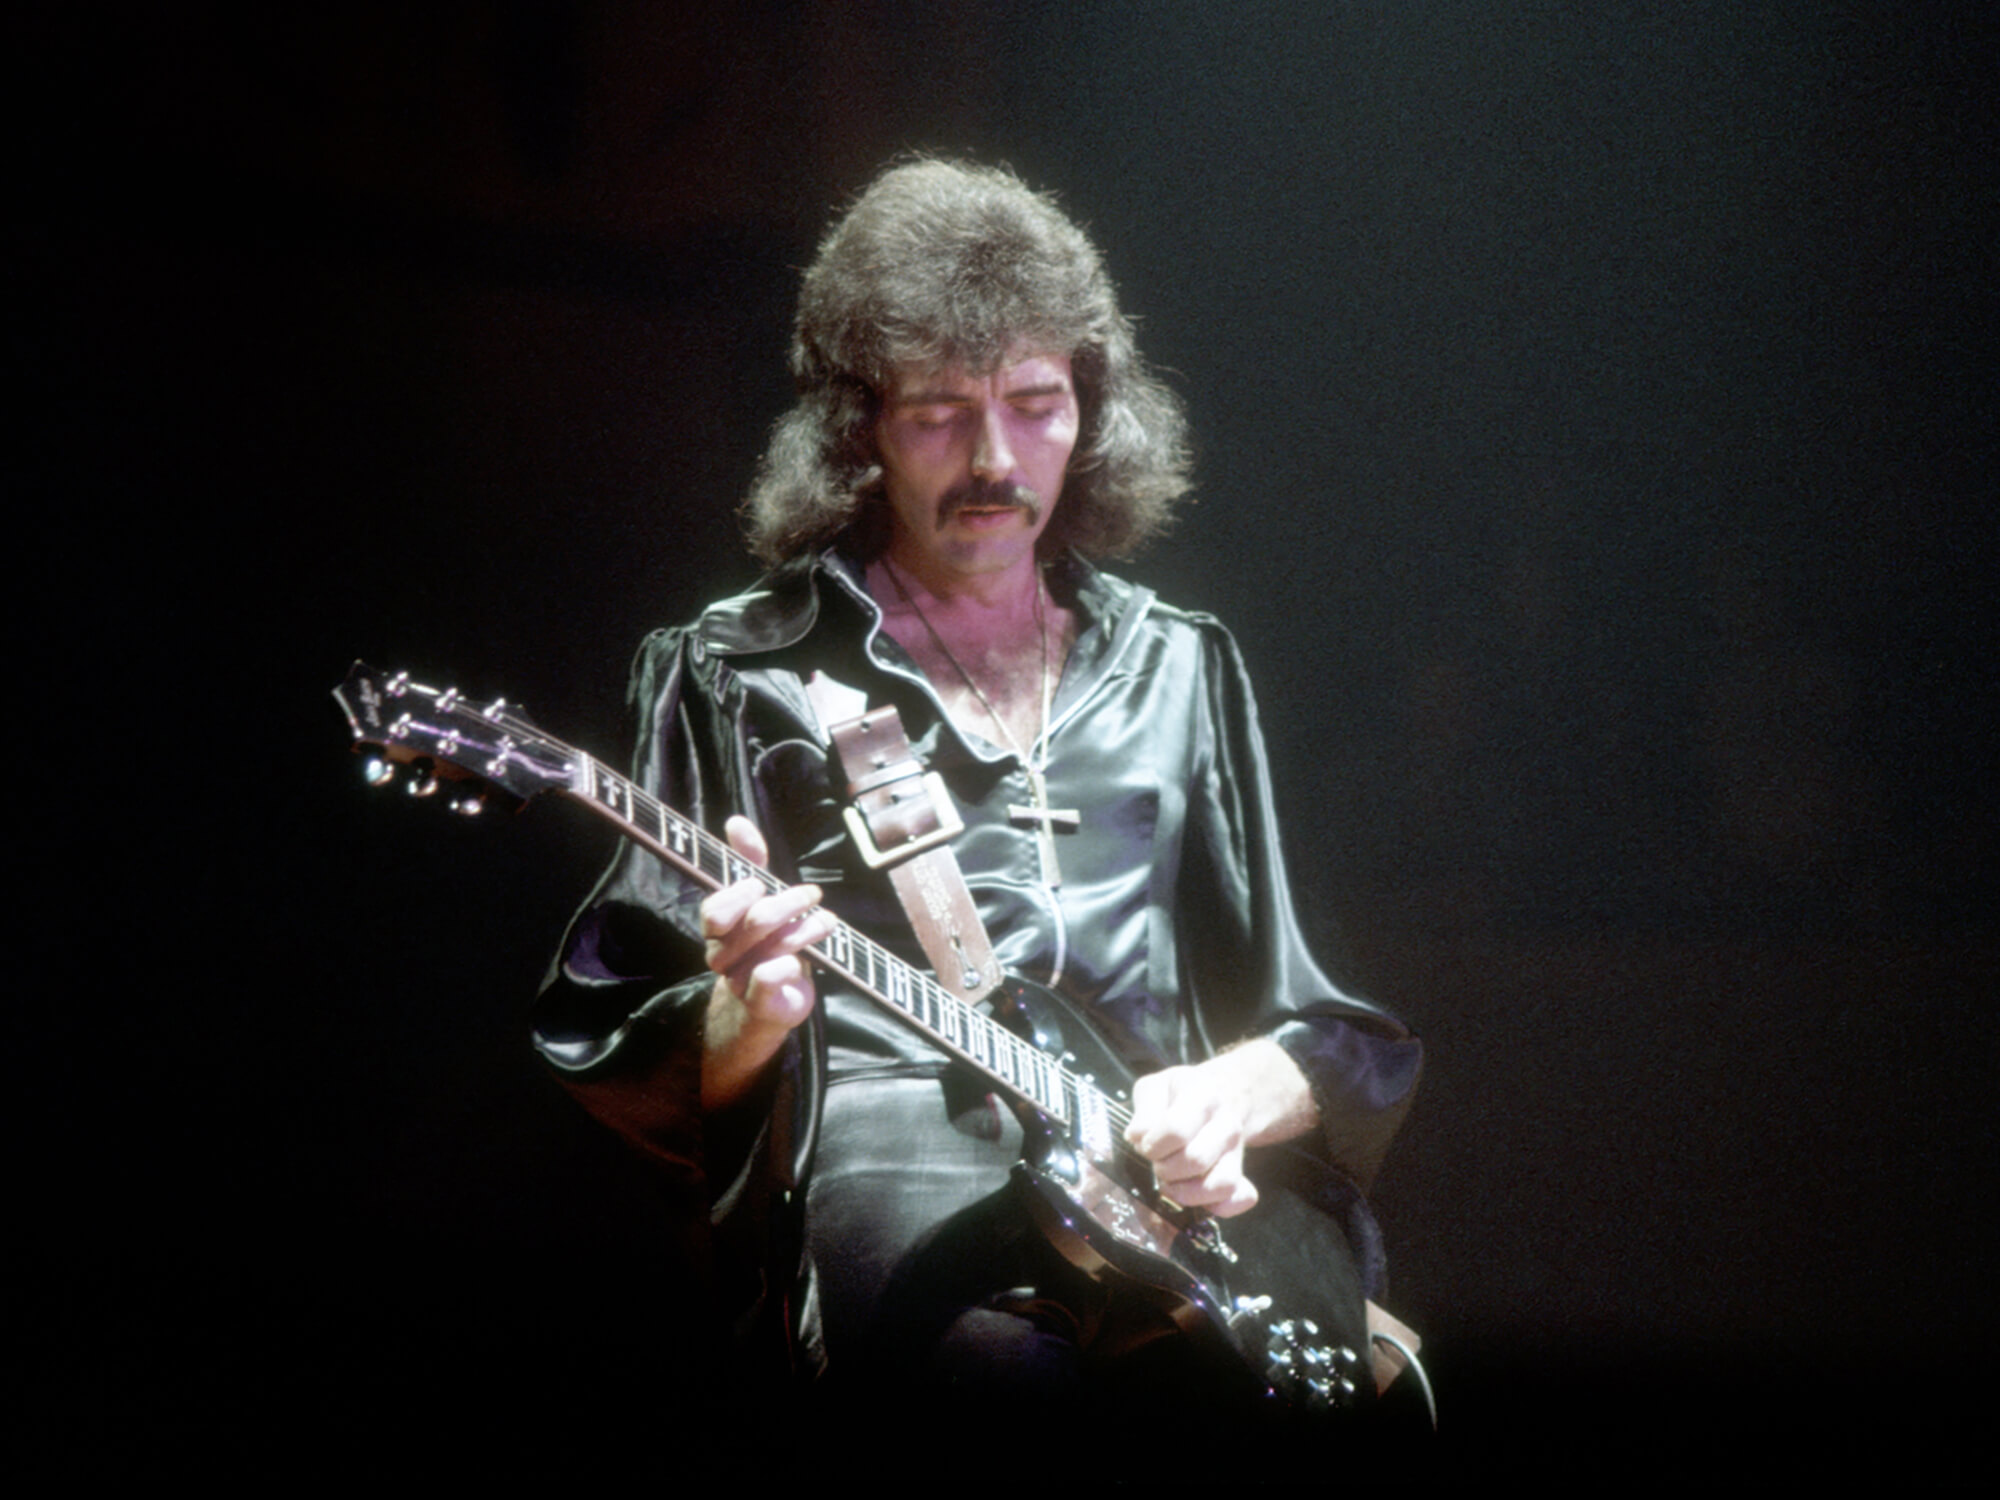 Tony Iommi performing with Black Sabbath in 1970, photo by Michael Ochs Archives/Stringer via Getty Images